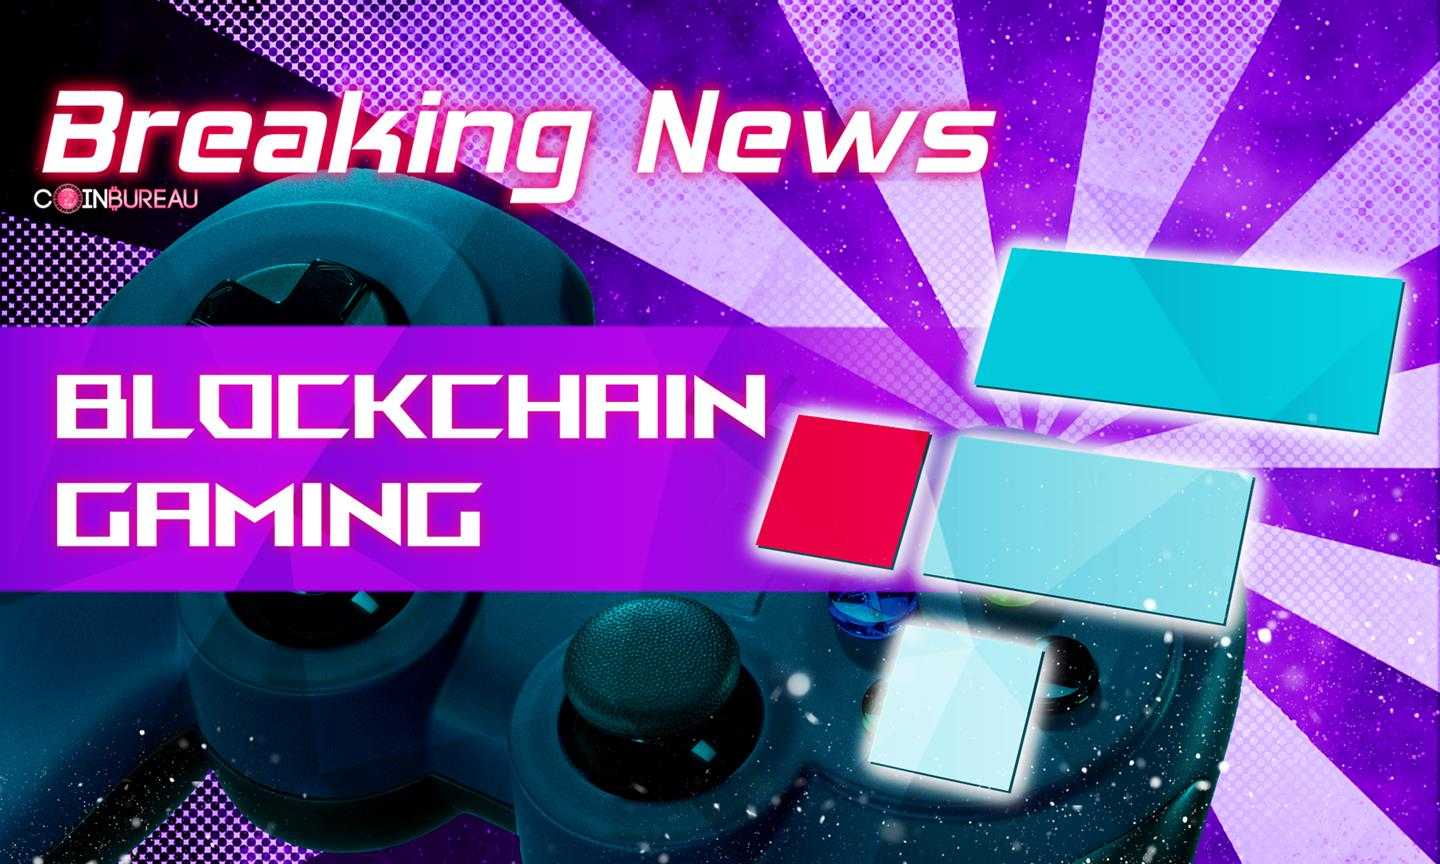 Blockchain Gaming coming to FTX